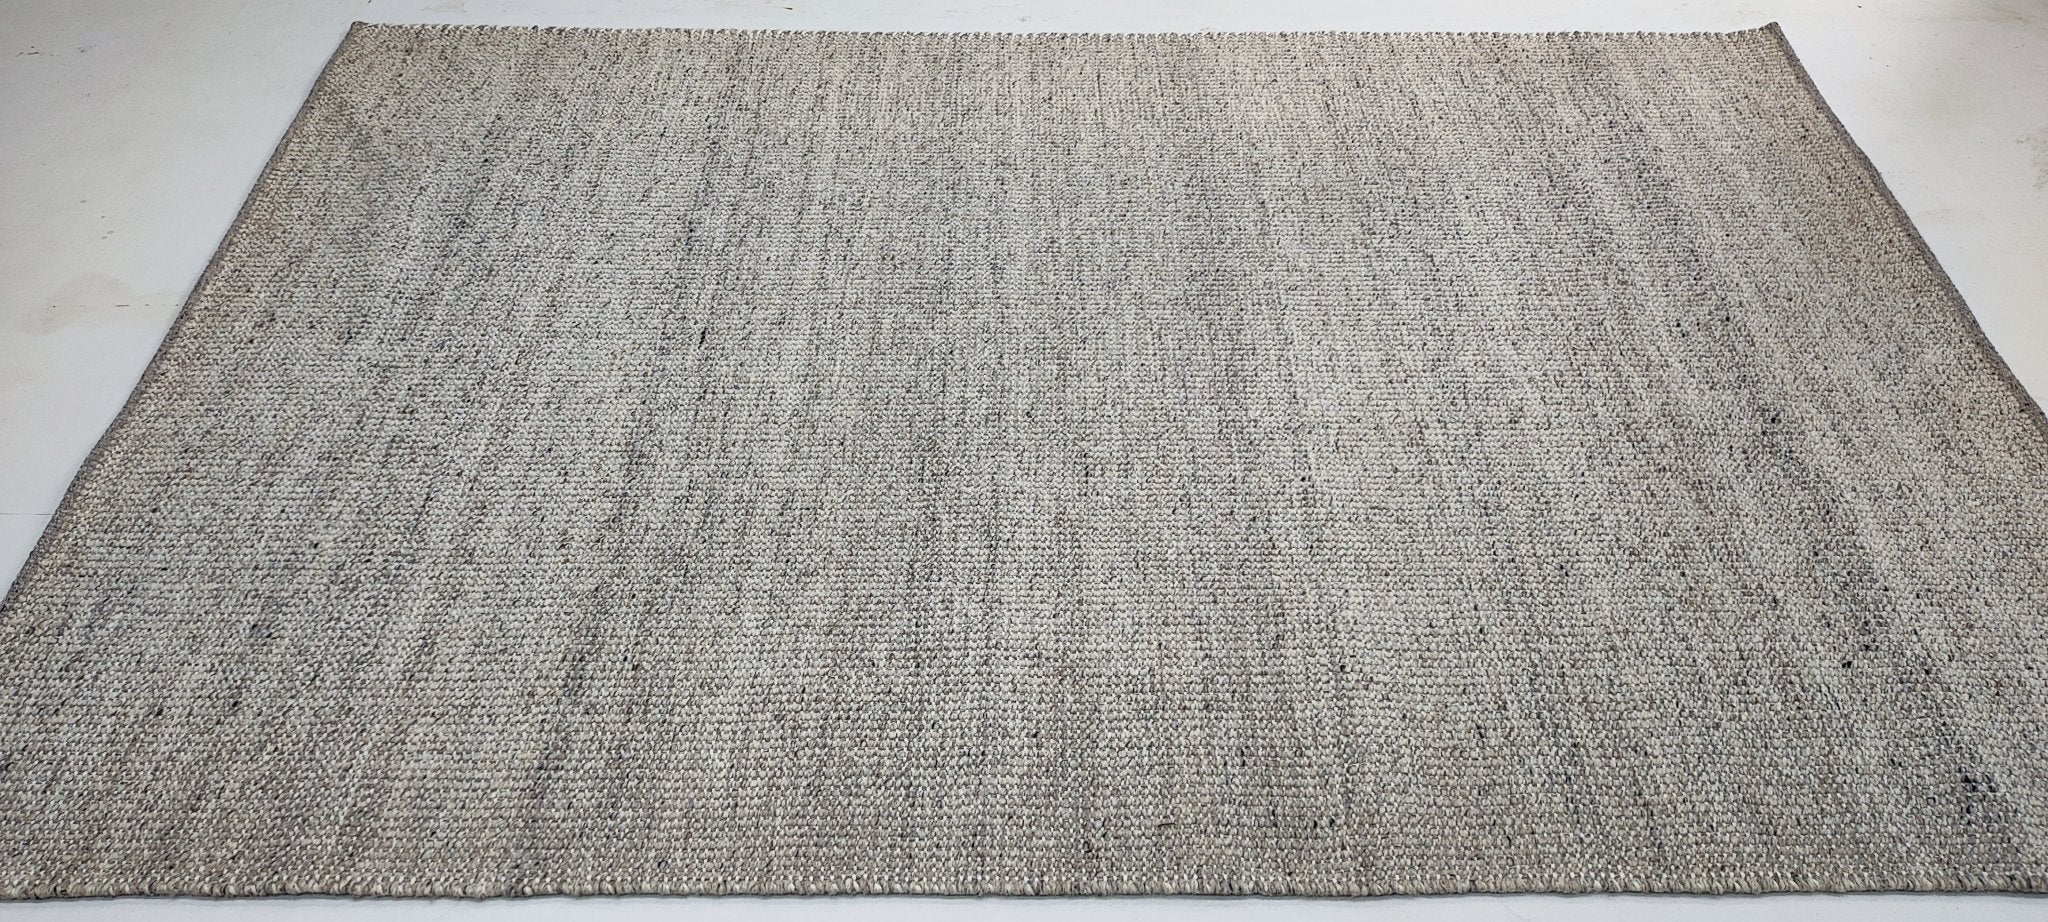 Krewe of Bosom Buddies 5.3x8 Handwoven Ivory Textured Durrie | Banana Manor Rug Factory Outlet